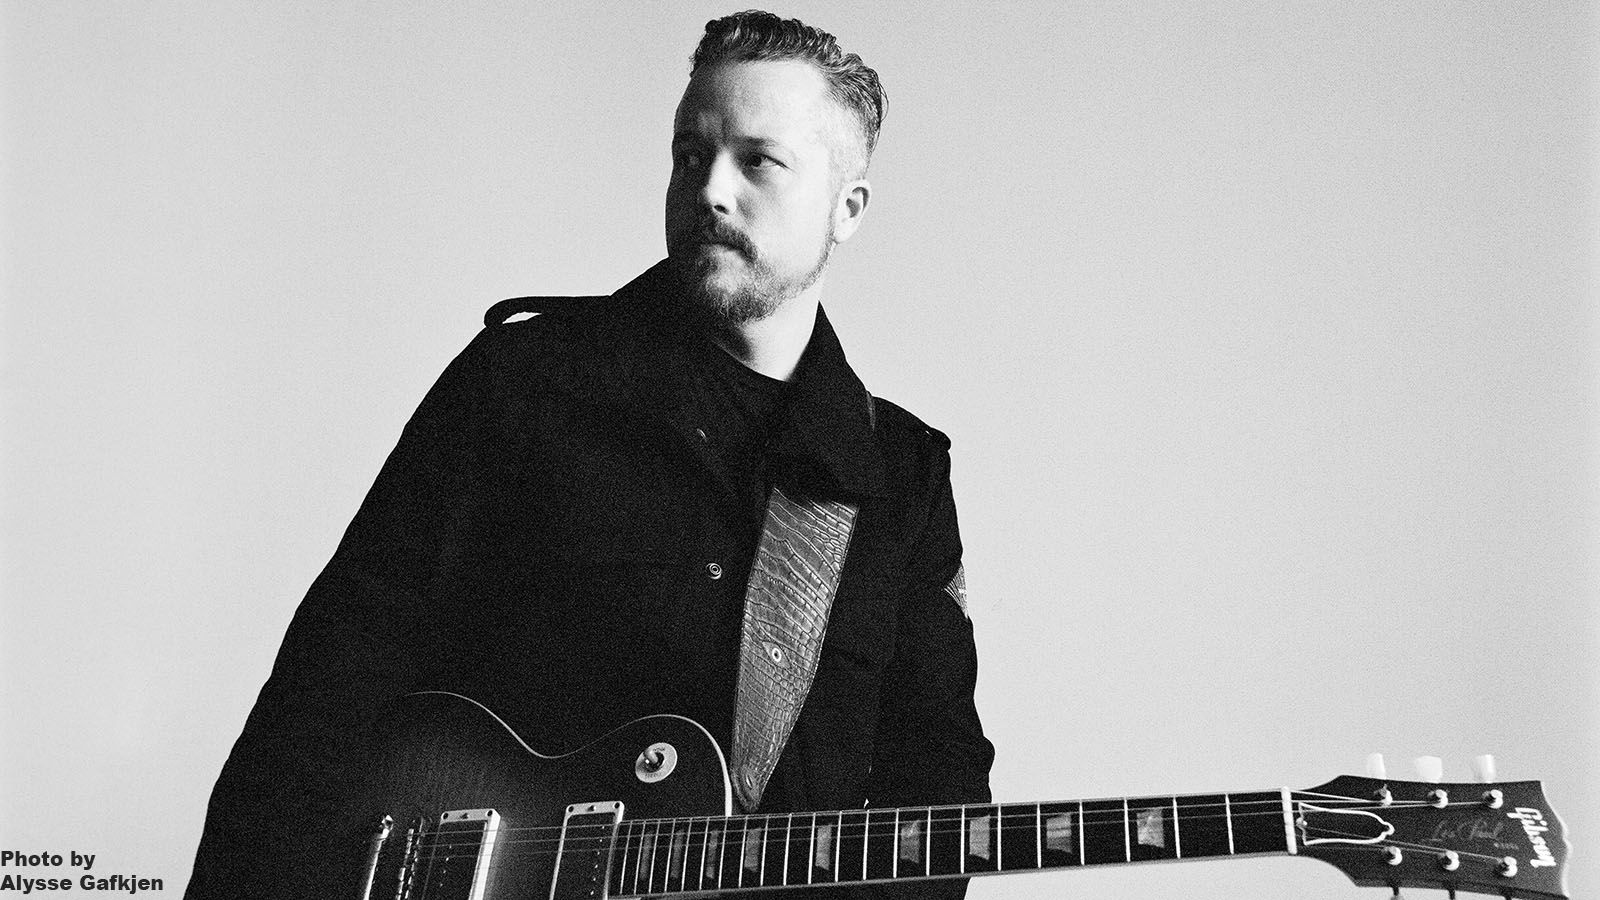 Jason Isbell & The 400 Unit will be at Embassy Theatre on Friday, March 8, with Palehound.